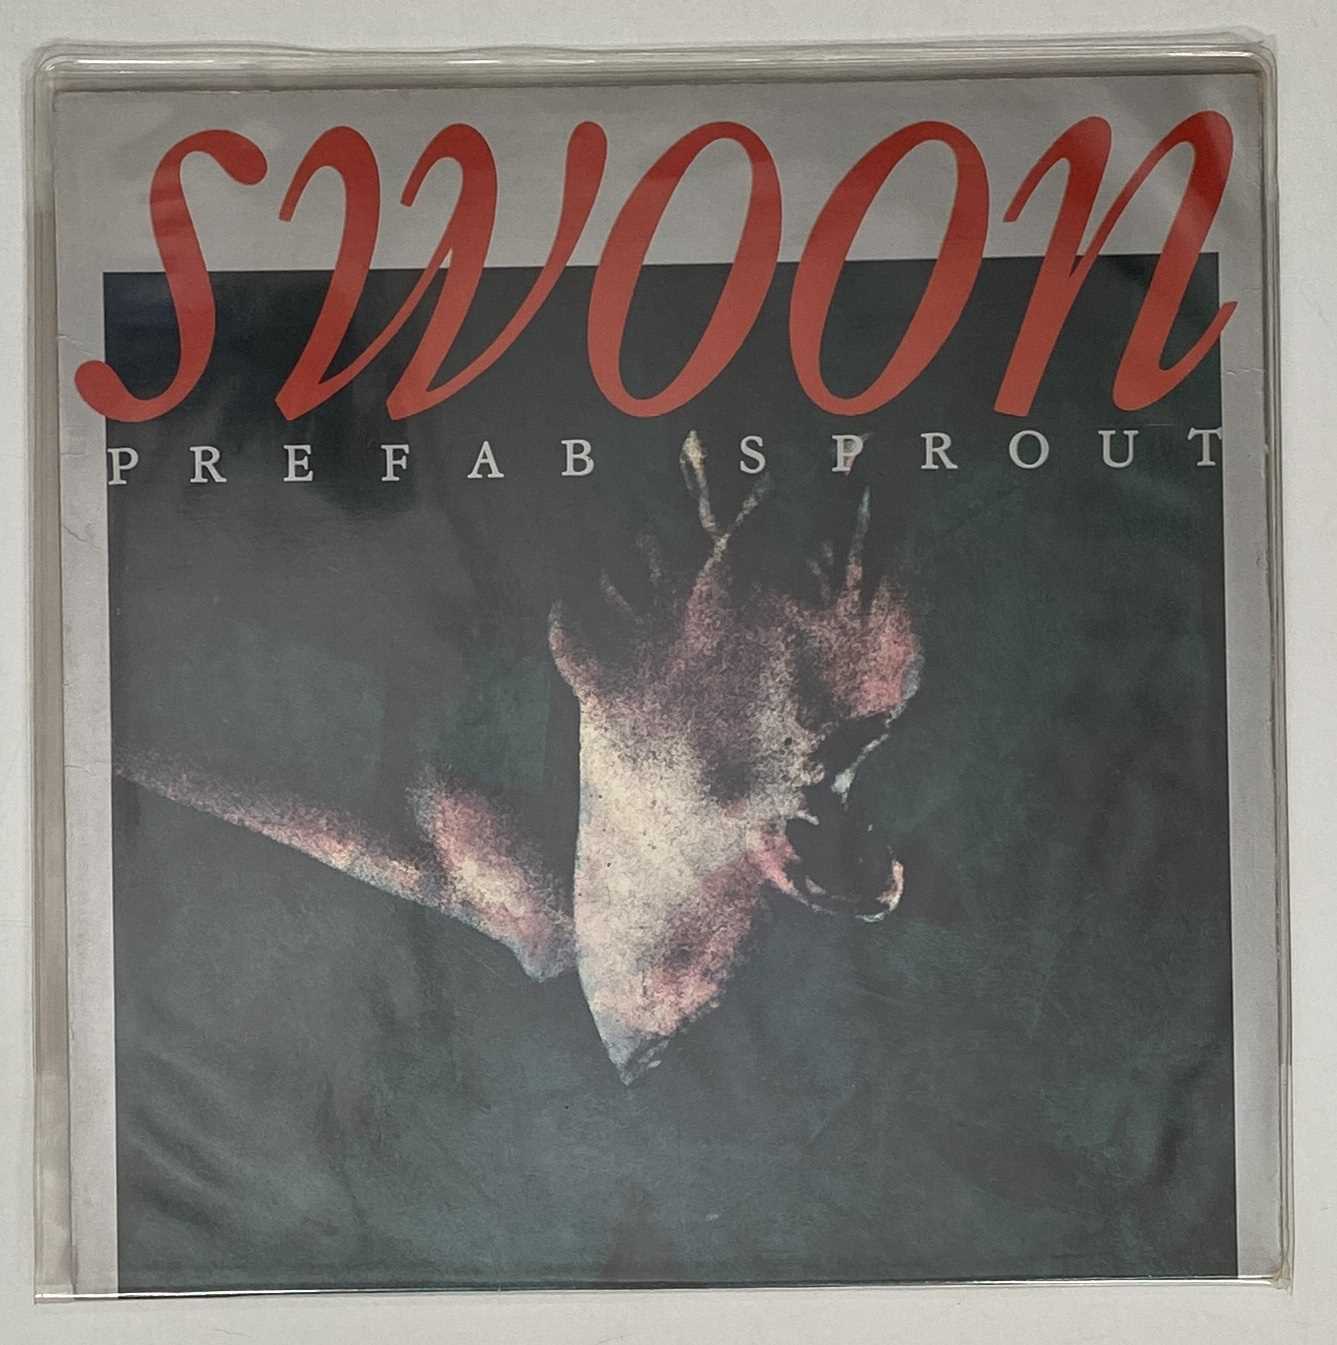 PREFAB SPROUT - LP PACK - Image 2 of 2